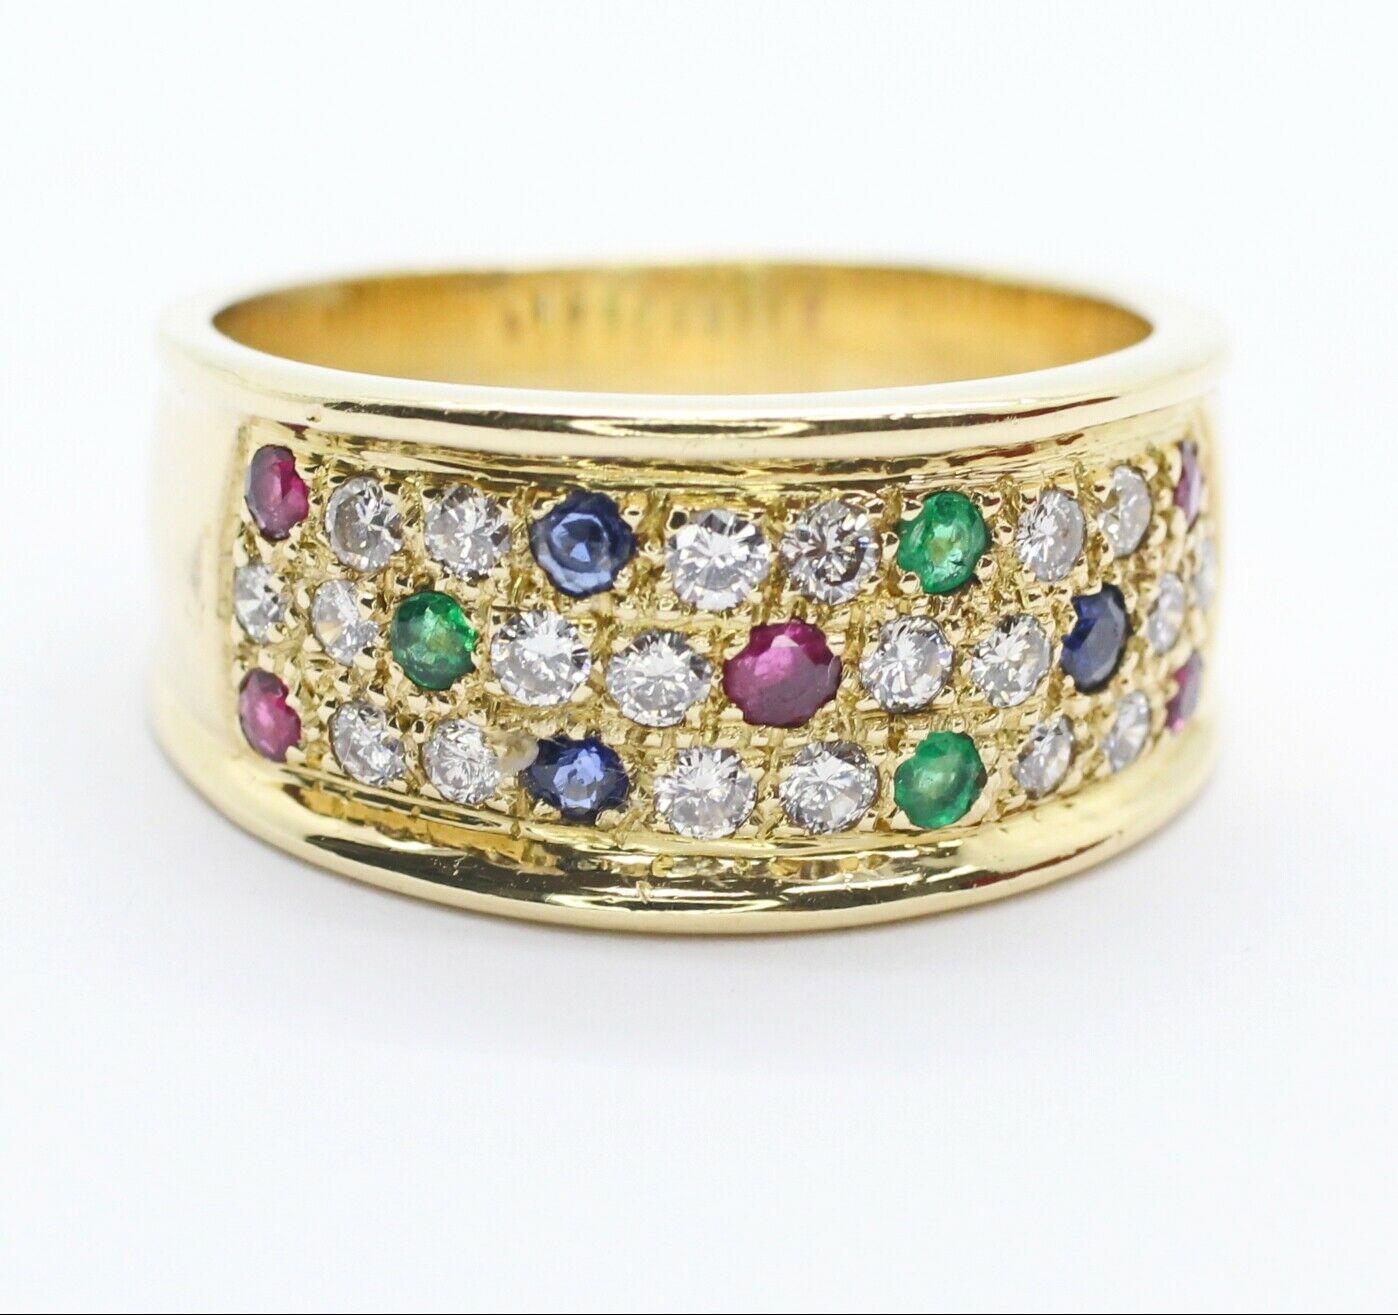 Le Vian wide band ring features a 20 pieces round cut diamonds in approximately 0.40 carat total weight in G color and SI1 stone clarity. This ring has different kind of gemstone Blue sapphire, Ruby and Emerald, this band crafted in 18K yellow gold